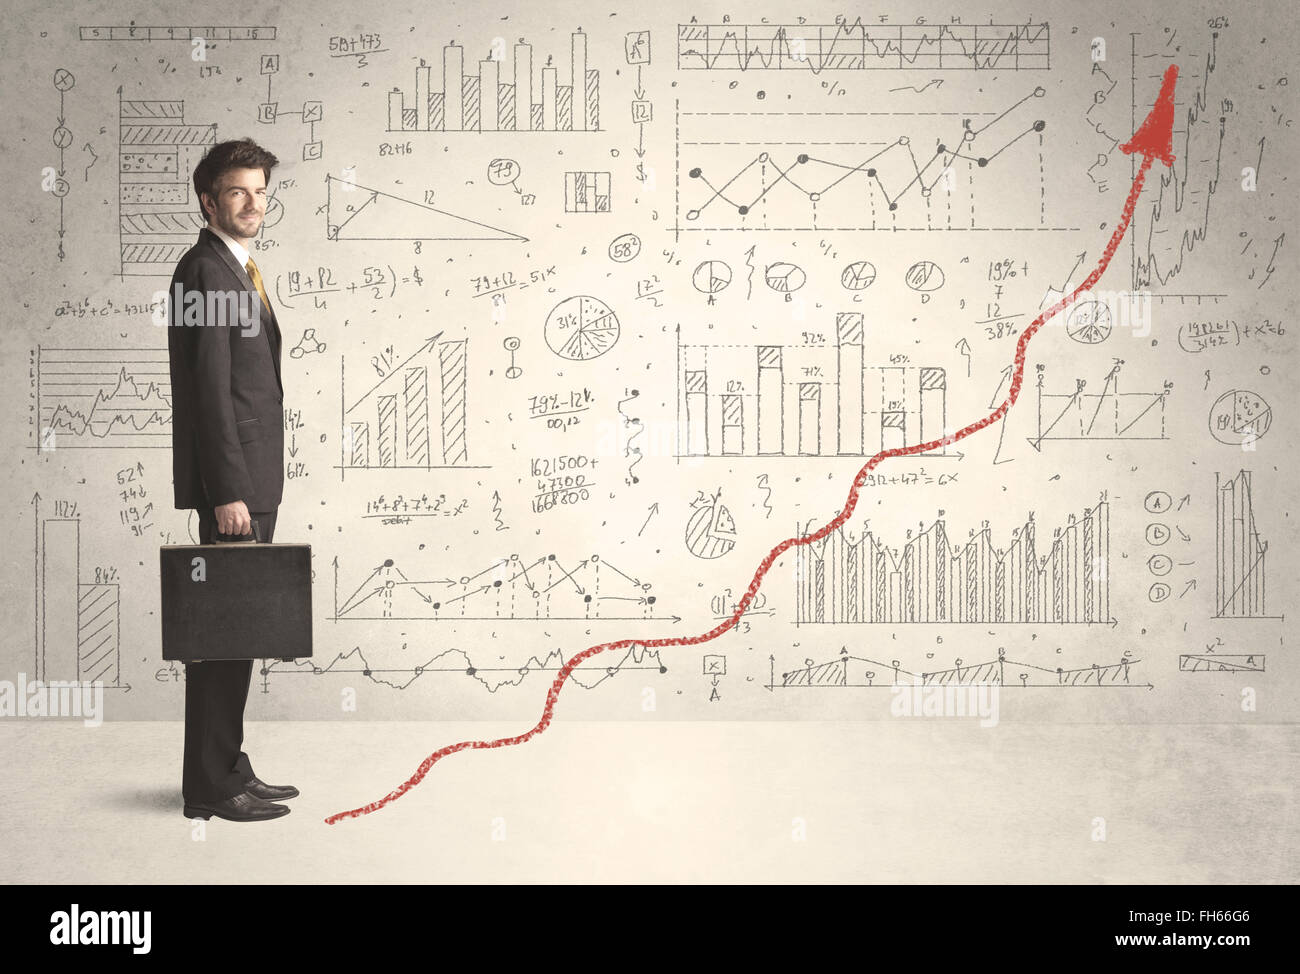 Business man climbing on red graph arrow concept Stock Photo